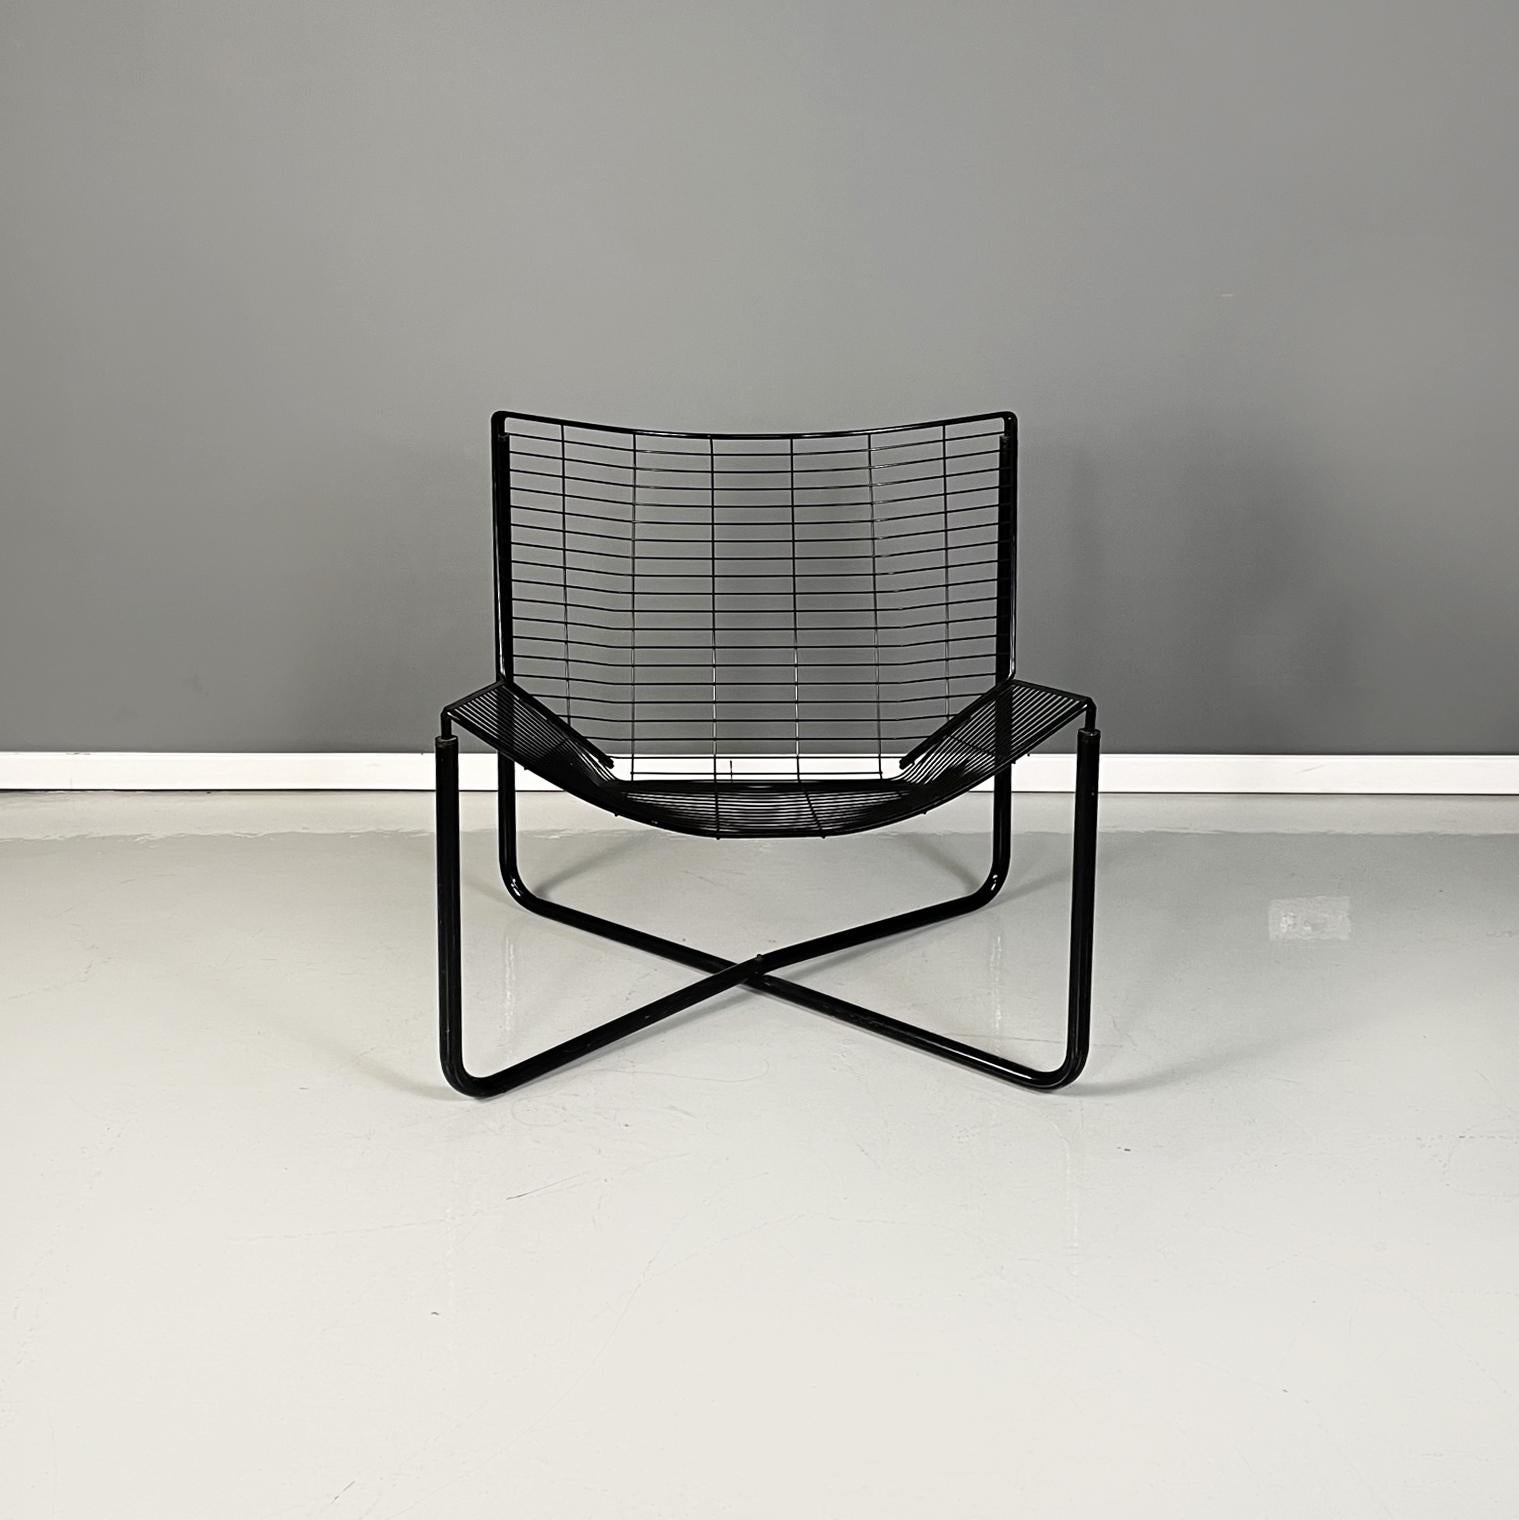 Italian modern Armchair in black tubular metal, 1980s
Armchair in black painted metal. The external structure is in black tubular while the internal one is made up of a series of thinner tubulars. The 4 round section legs cross under the